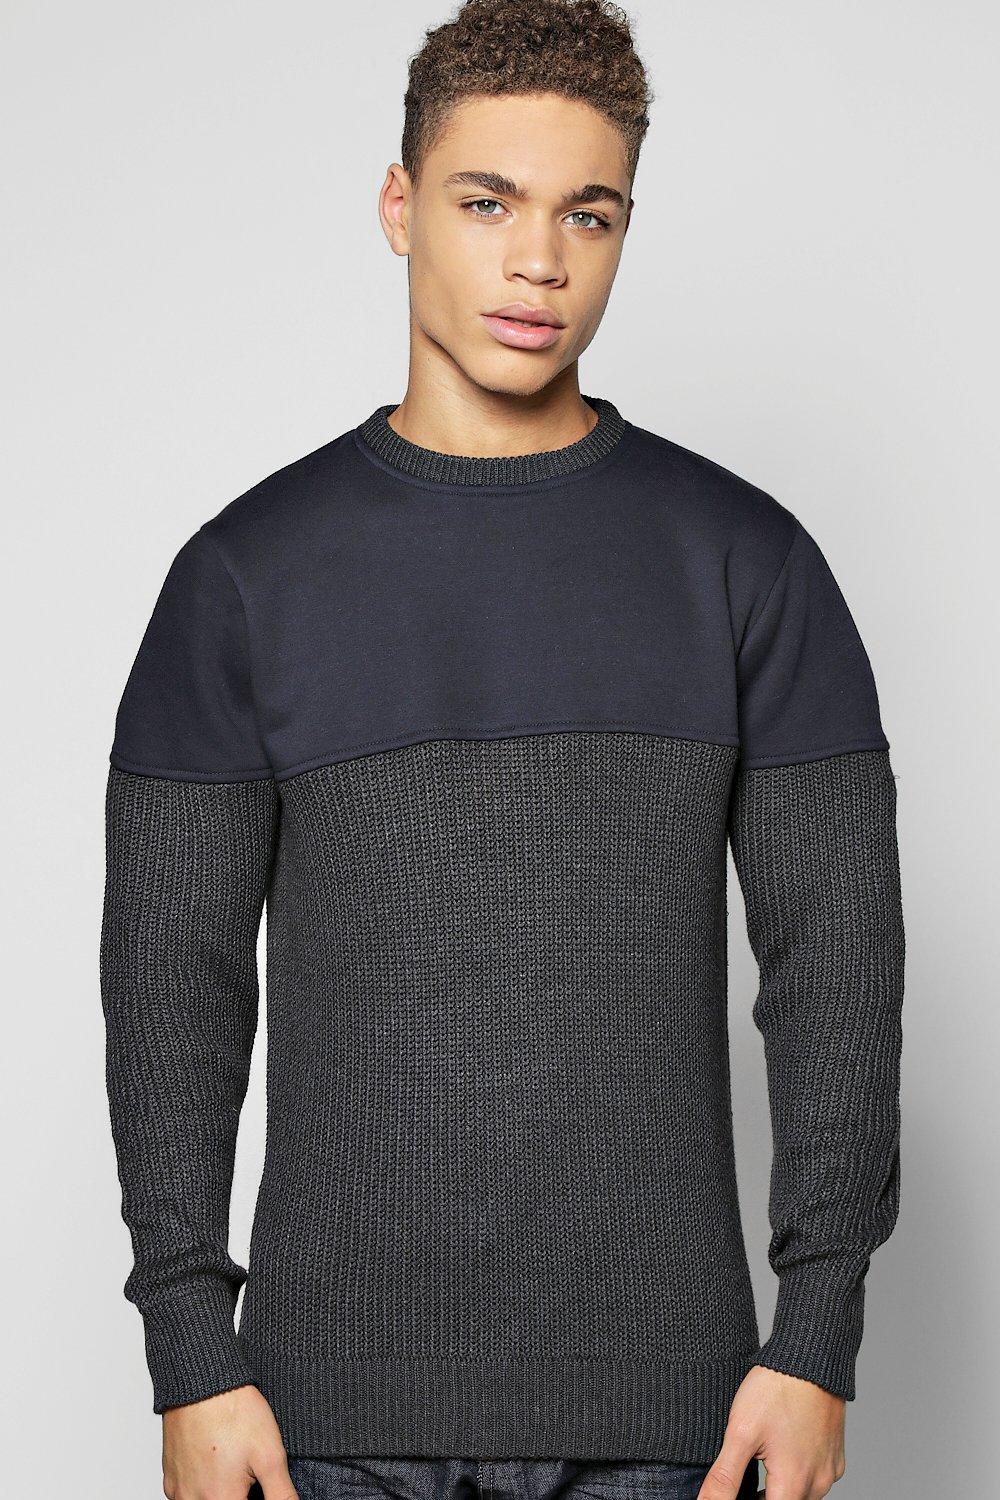 Boohoo Mens Cable Knit Jumper With Jersey Sleeves | eBay